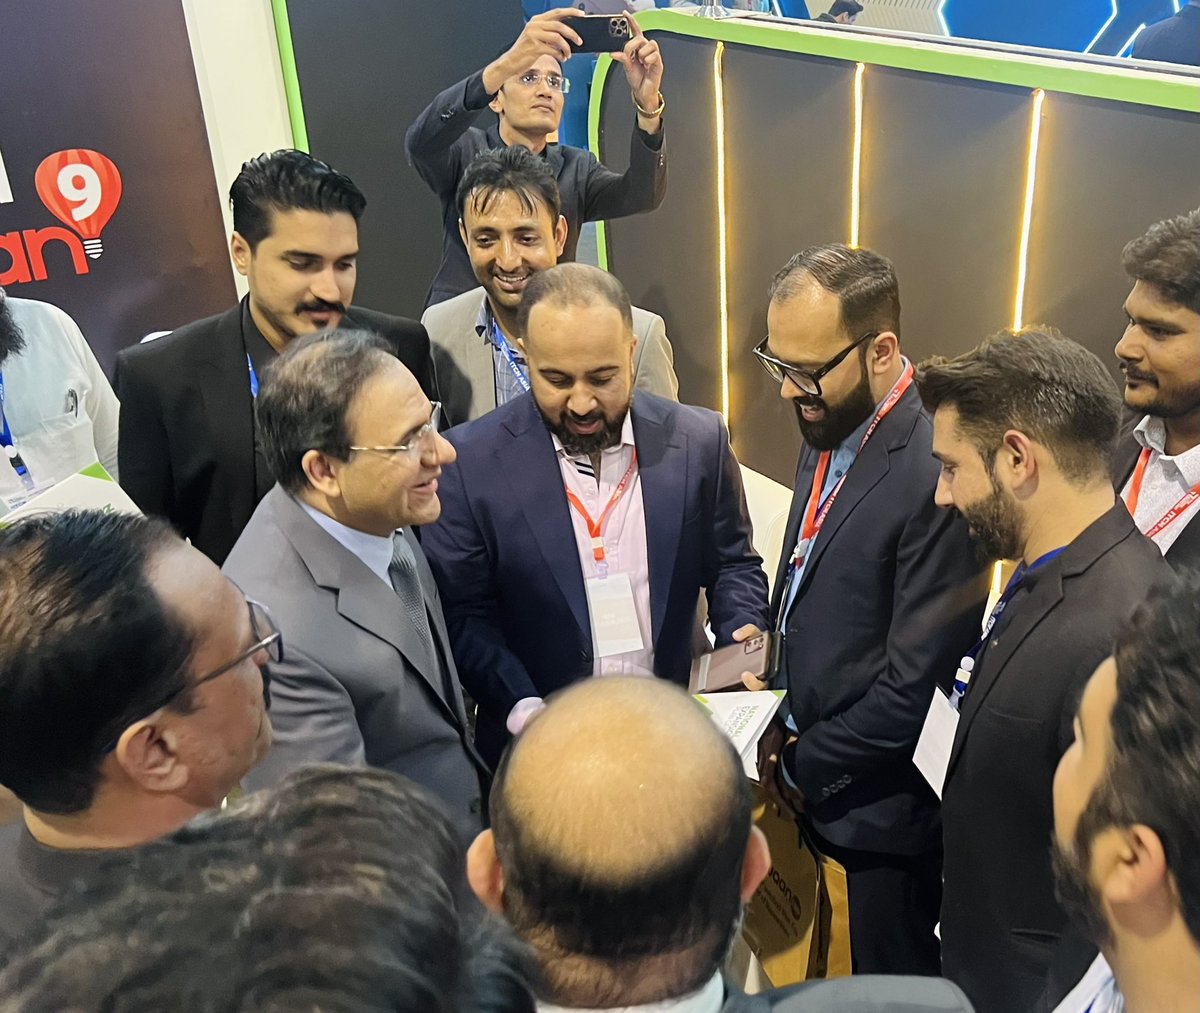 We had the honour of welcoming Dr @umarsaif back to our midst during ITCN Asia Expo. With hearts brimming with pride, our team had the privilege of briefing him on the remarkable progress, exponential growth & success that the PITB Incubation Wing has achieved!